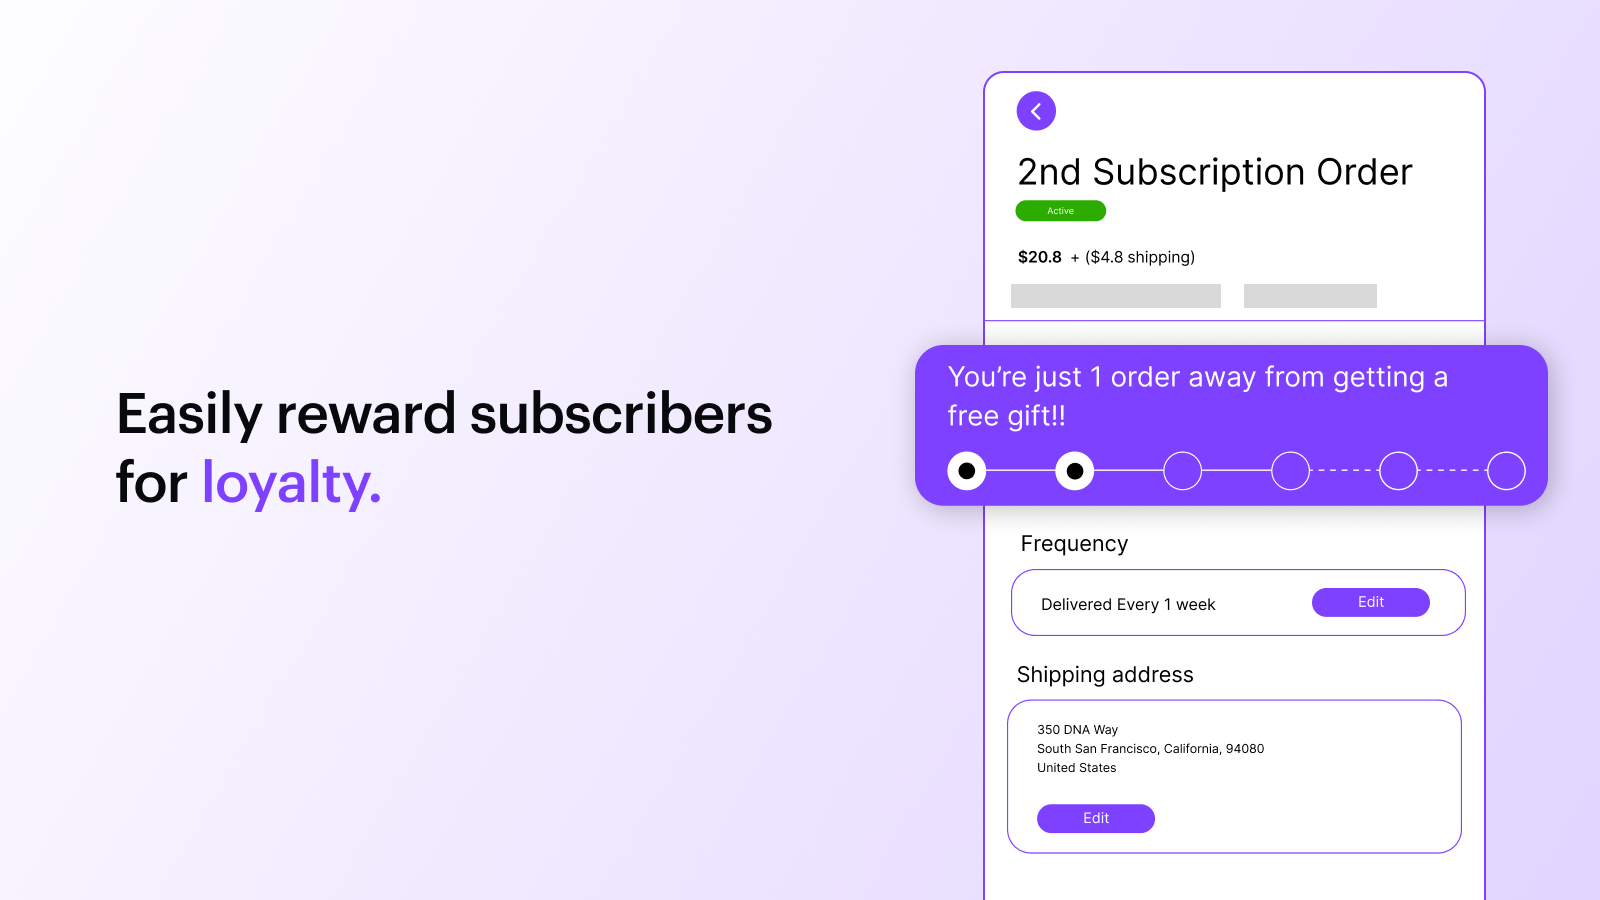 Gamify the way you reward your subscribers with free gifts, discounts and product swaps!